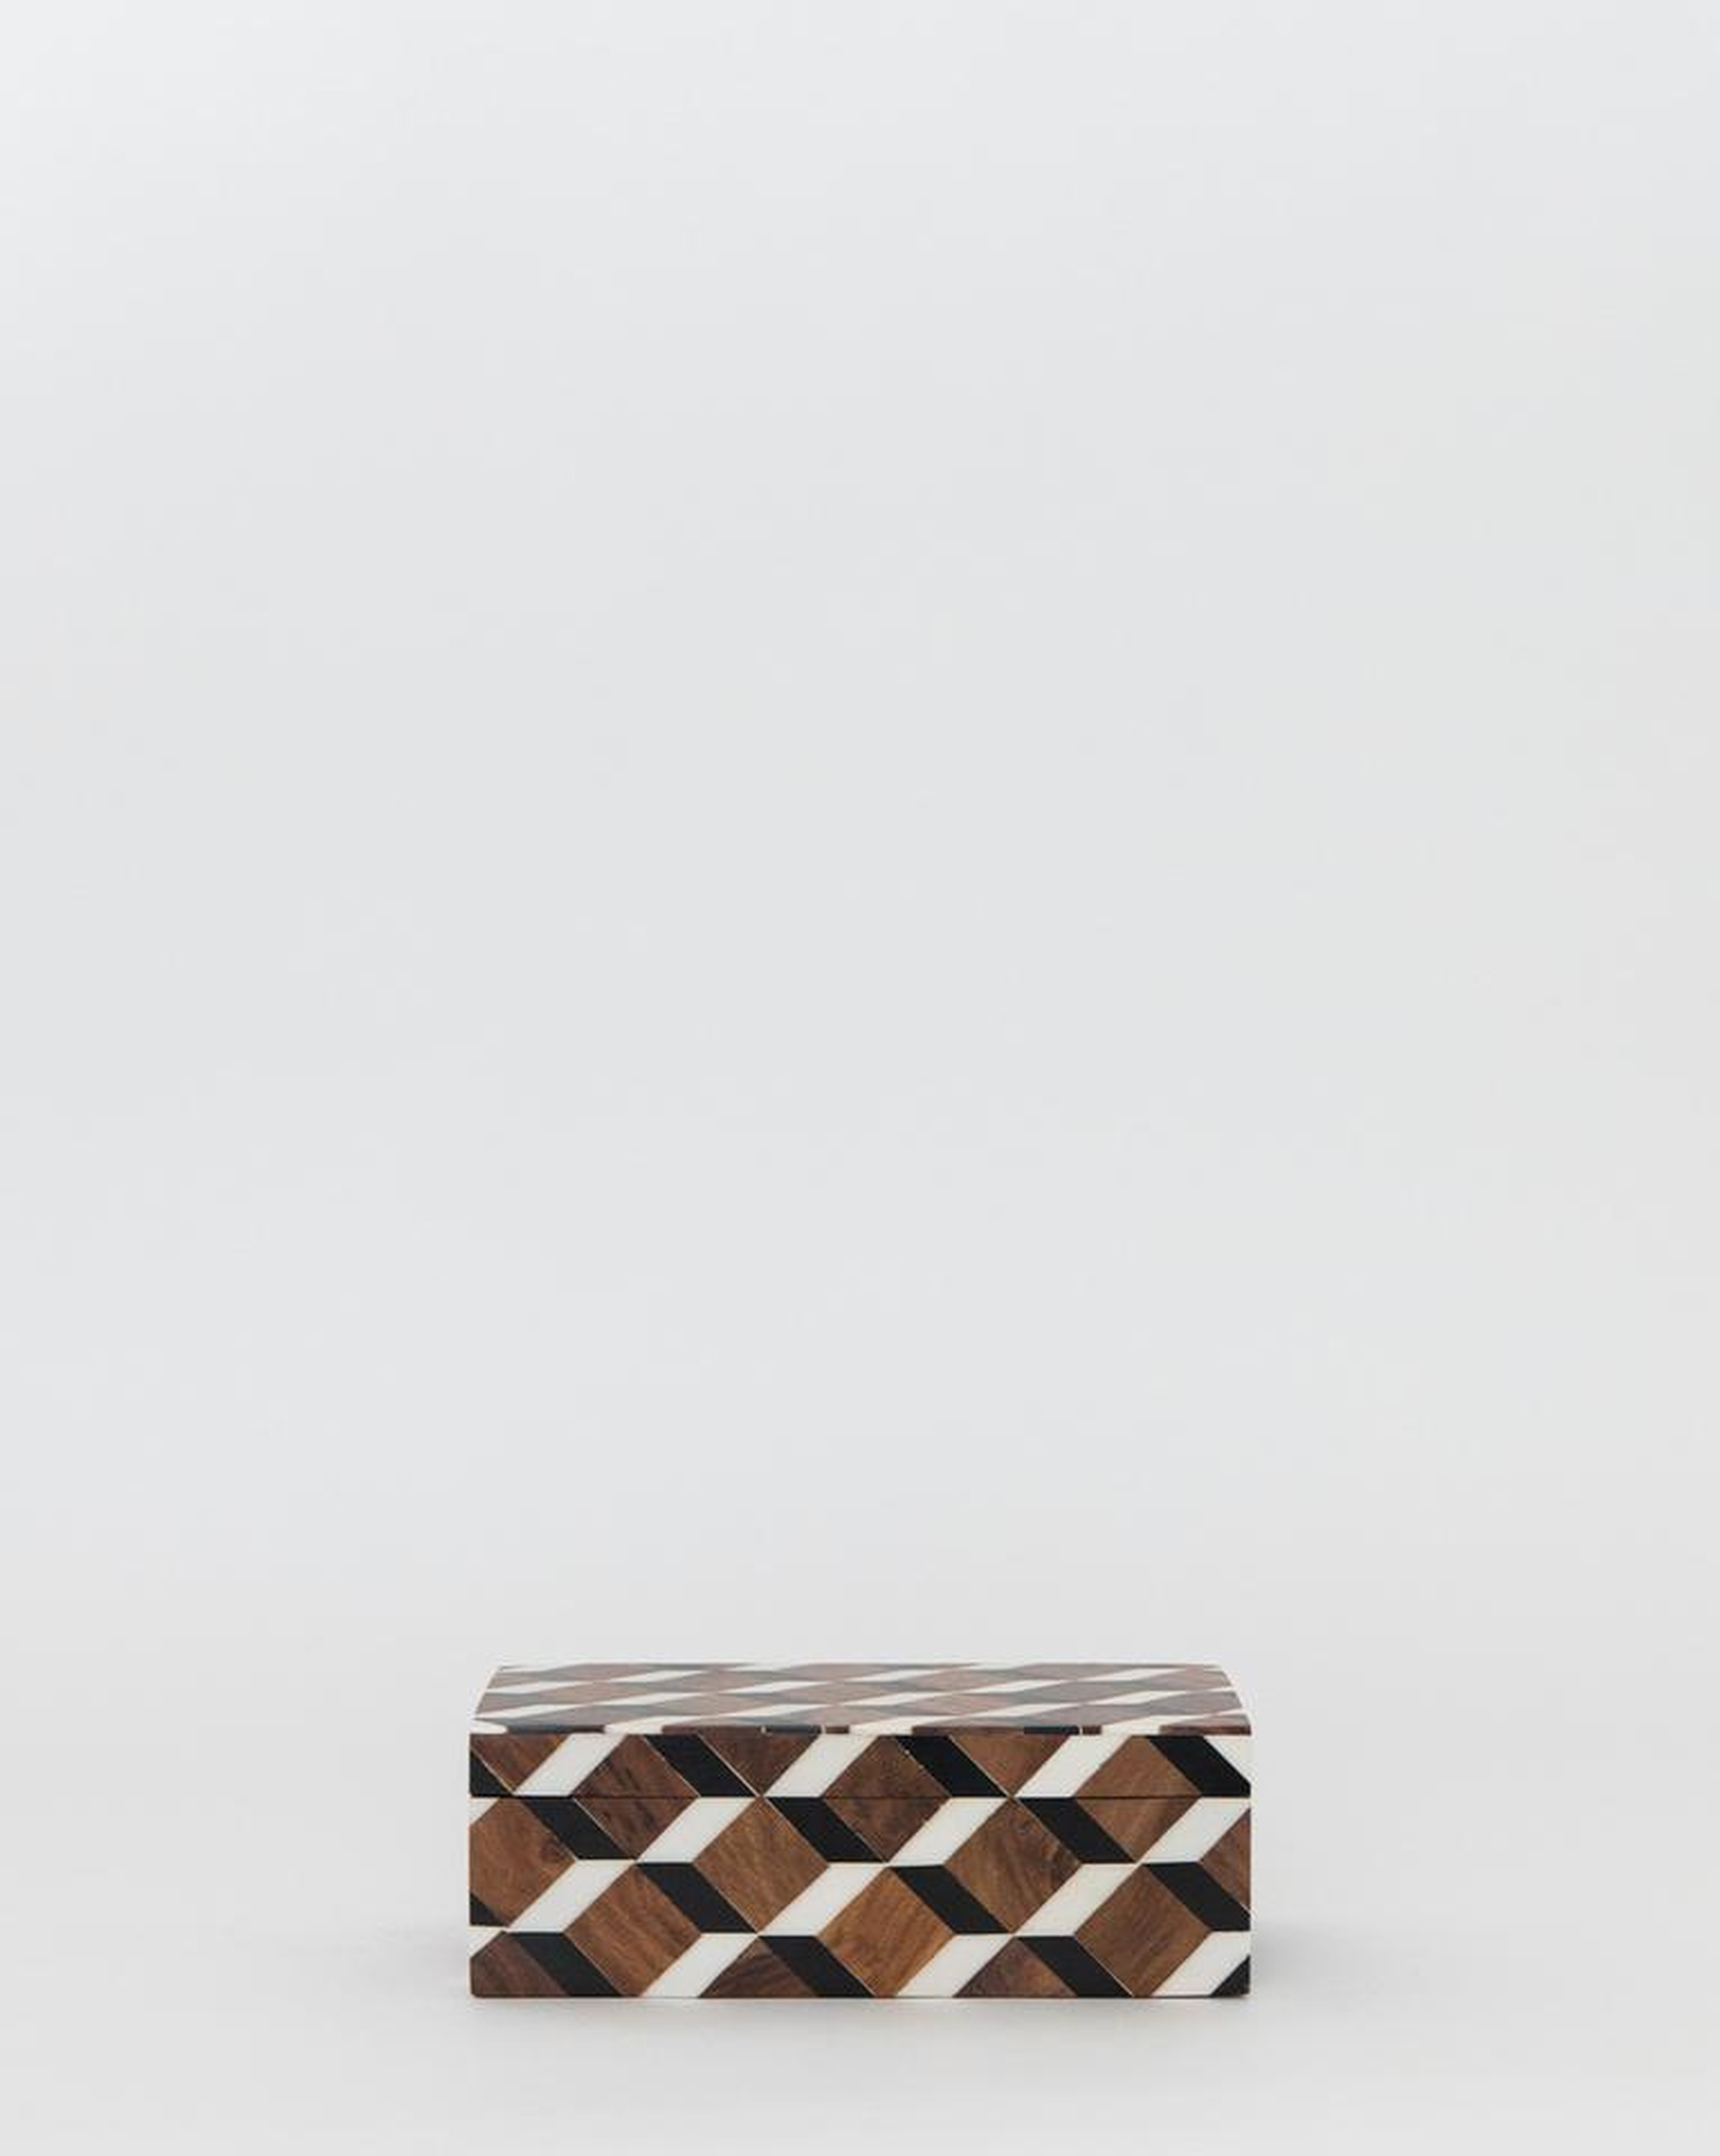 ARMO PATTERNED BOX - McGee & Co.